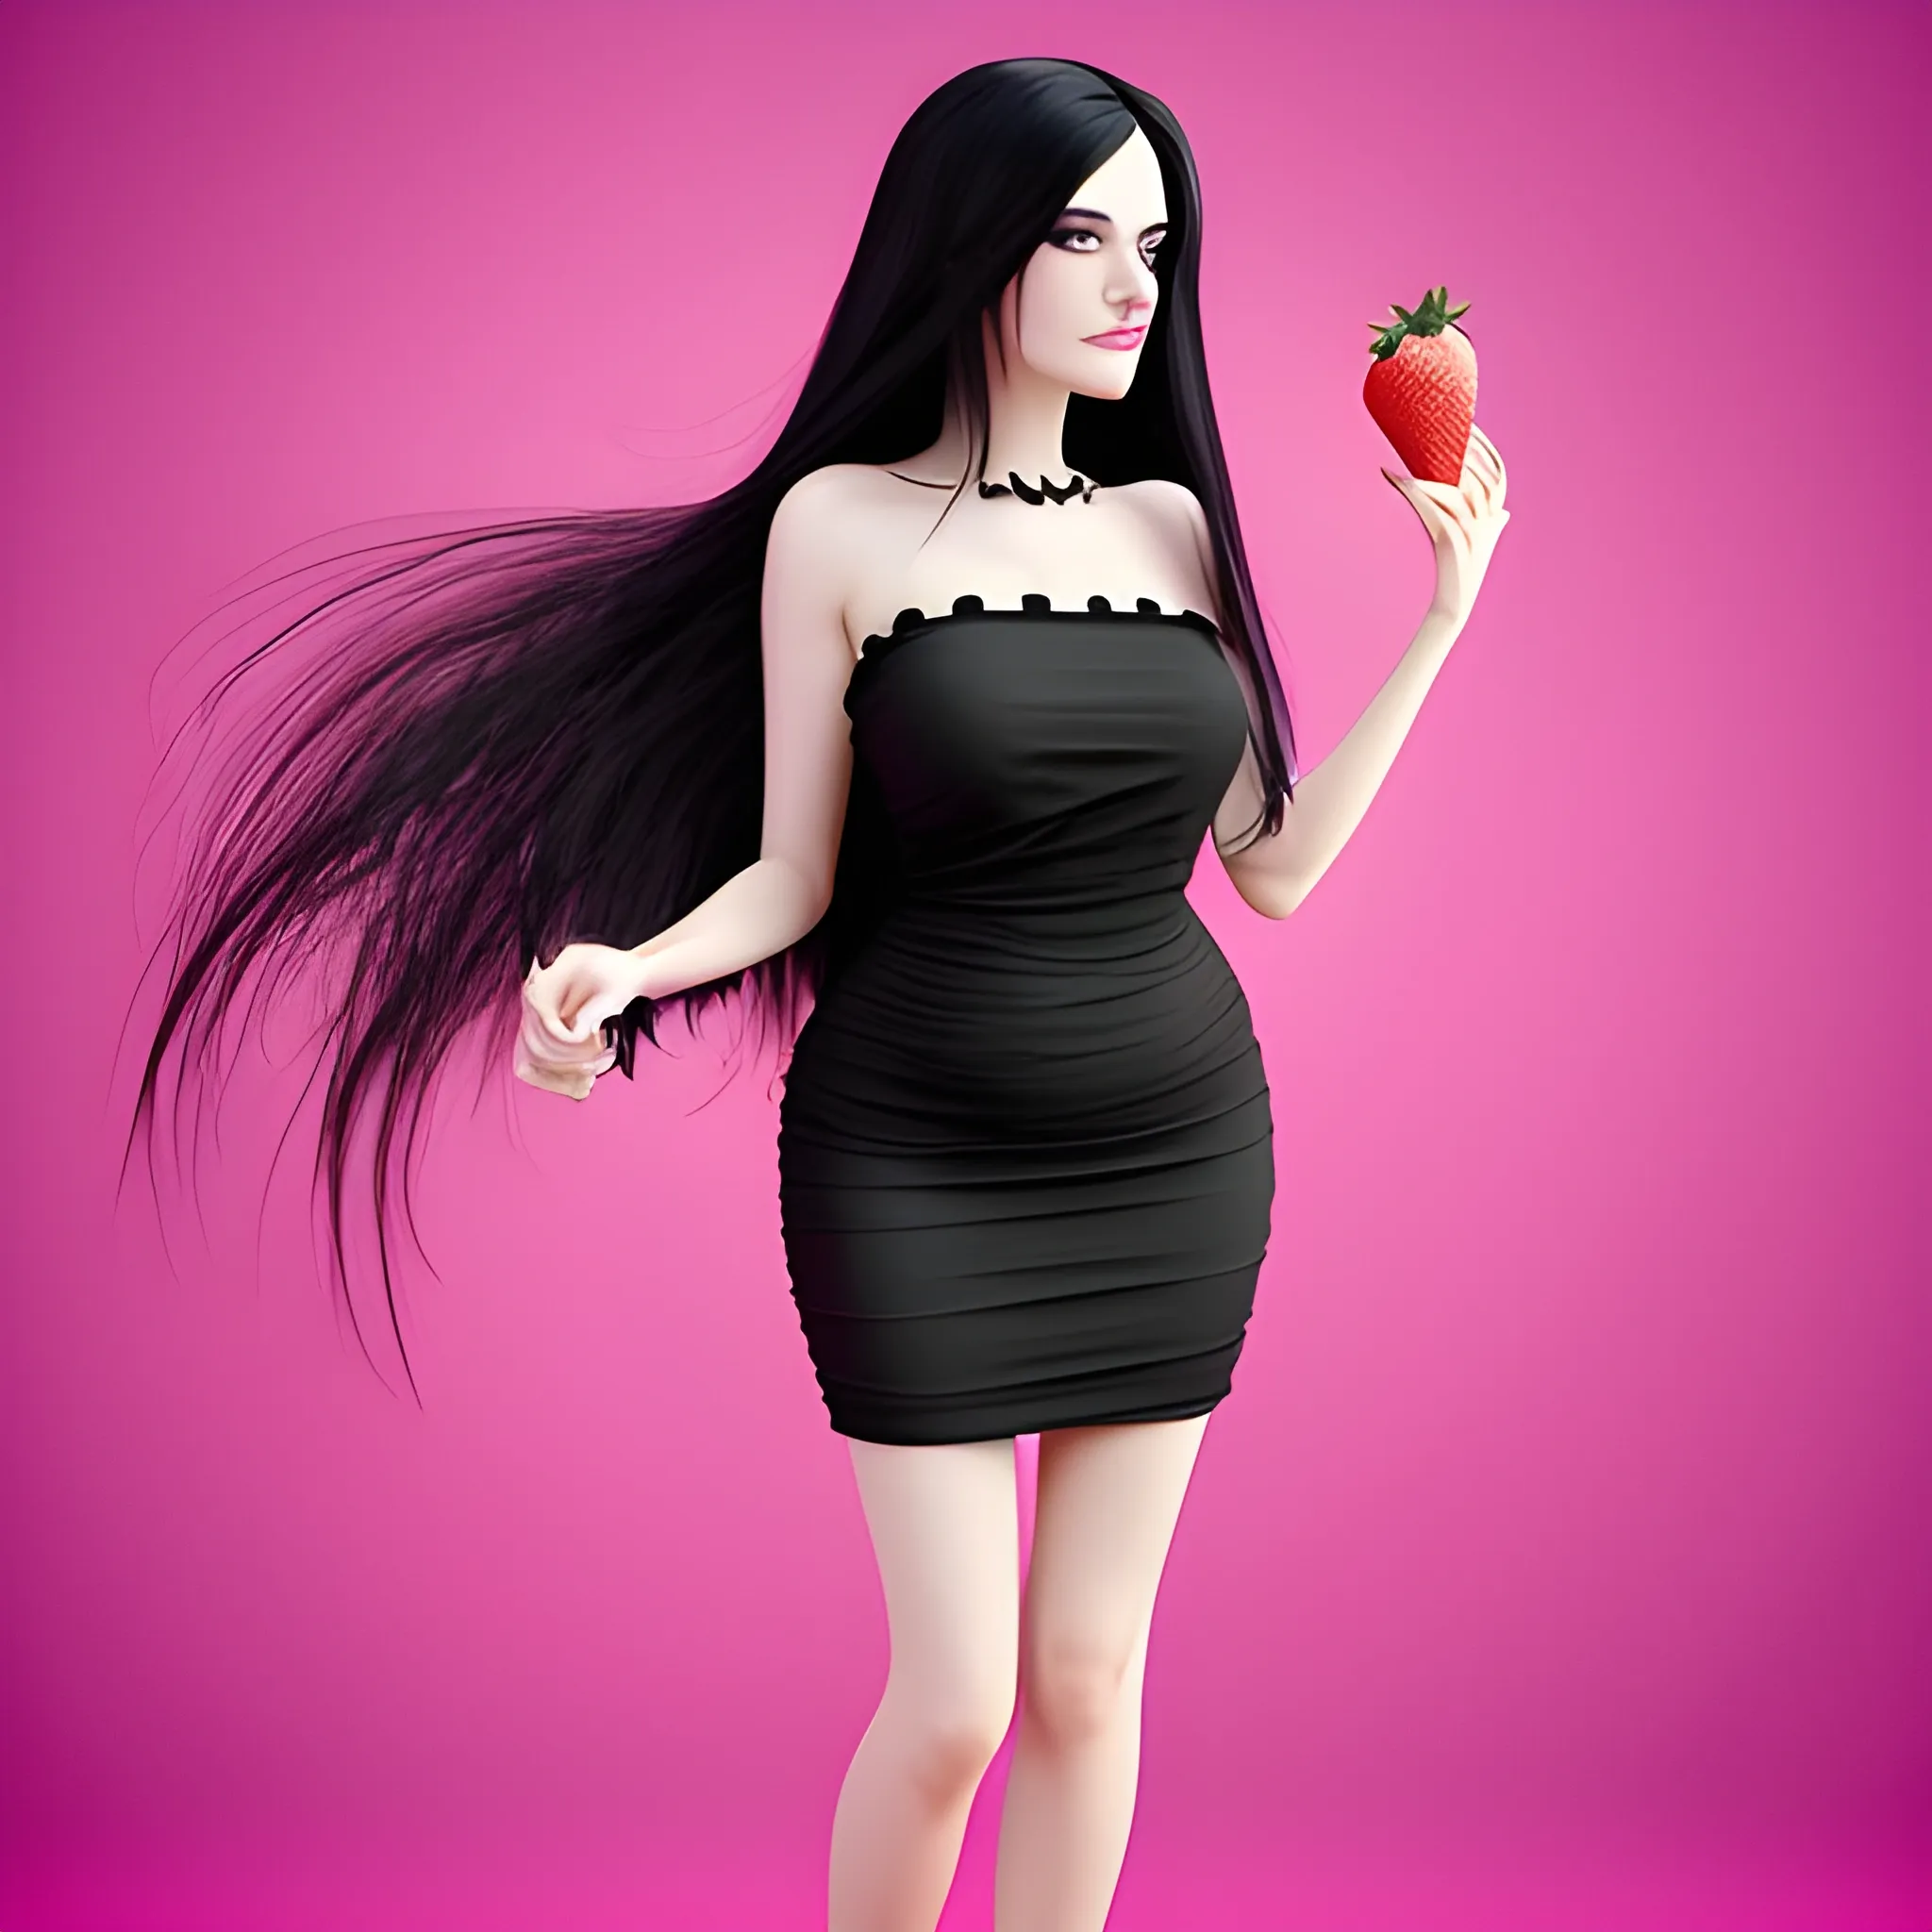 beautiful woman with long black hair wearing a black dress stands on a pink background and eats a large strawberry, 3D long legs sexi